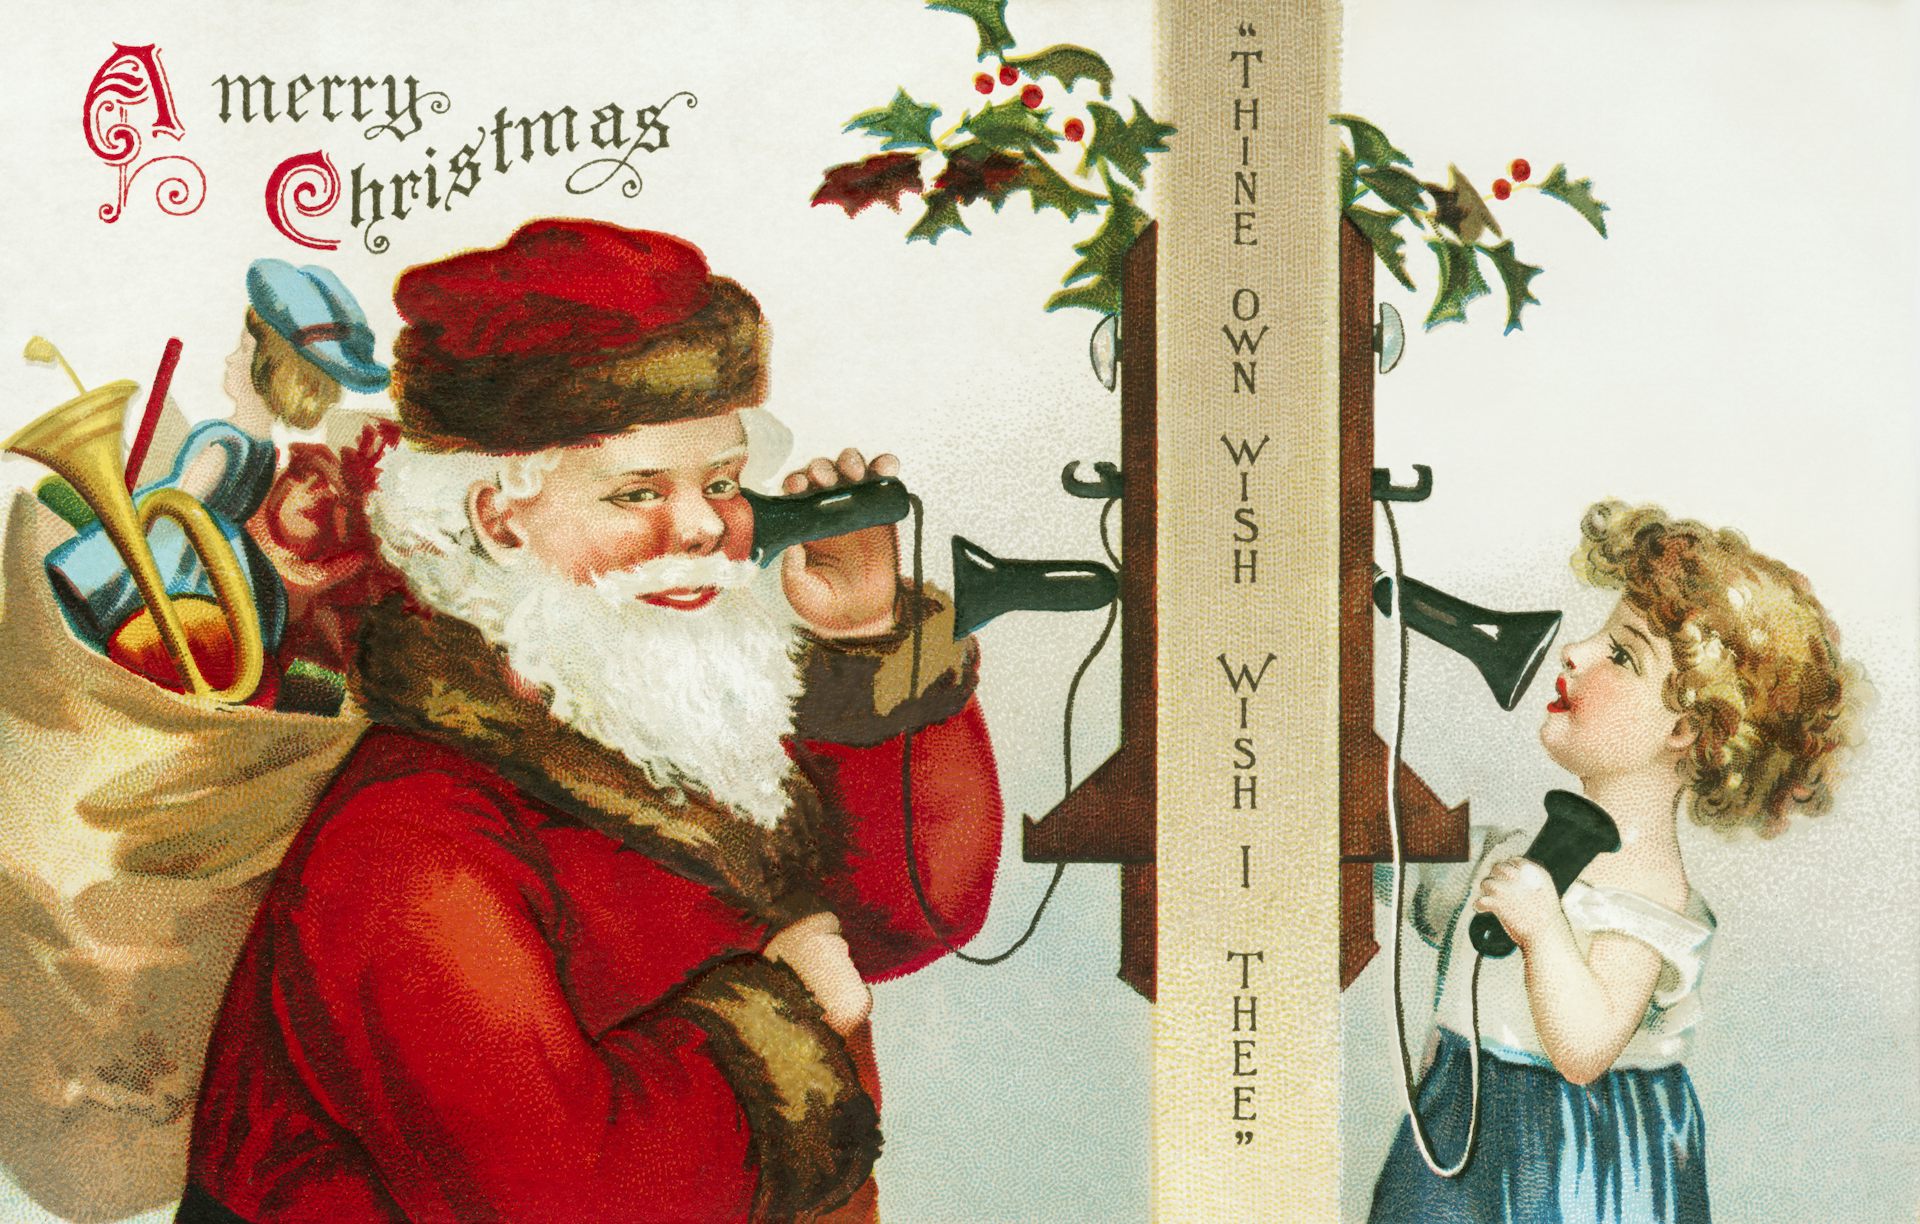 A vintage card shows a painted Santa speaking to a little girl over the phone